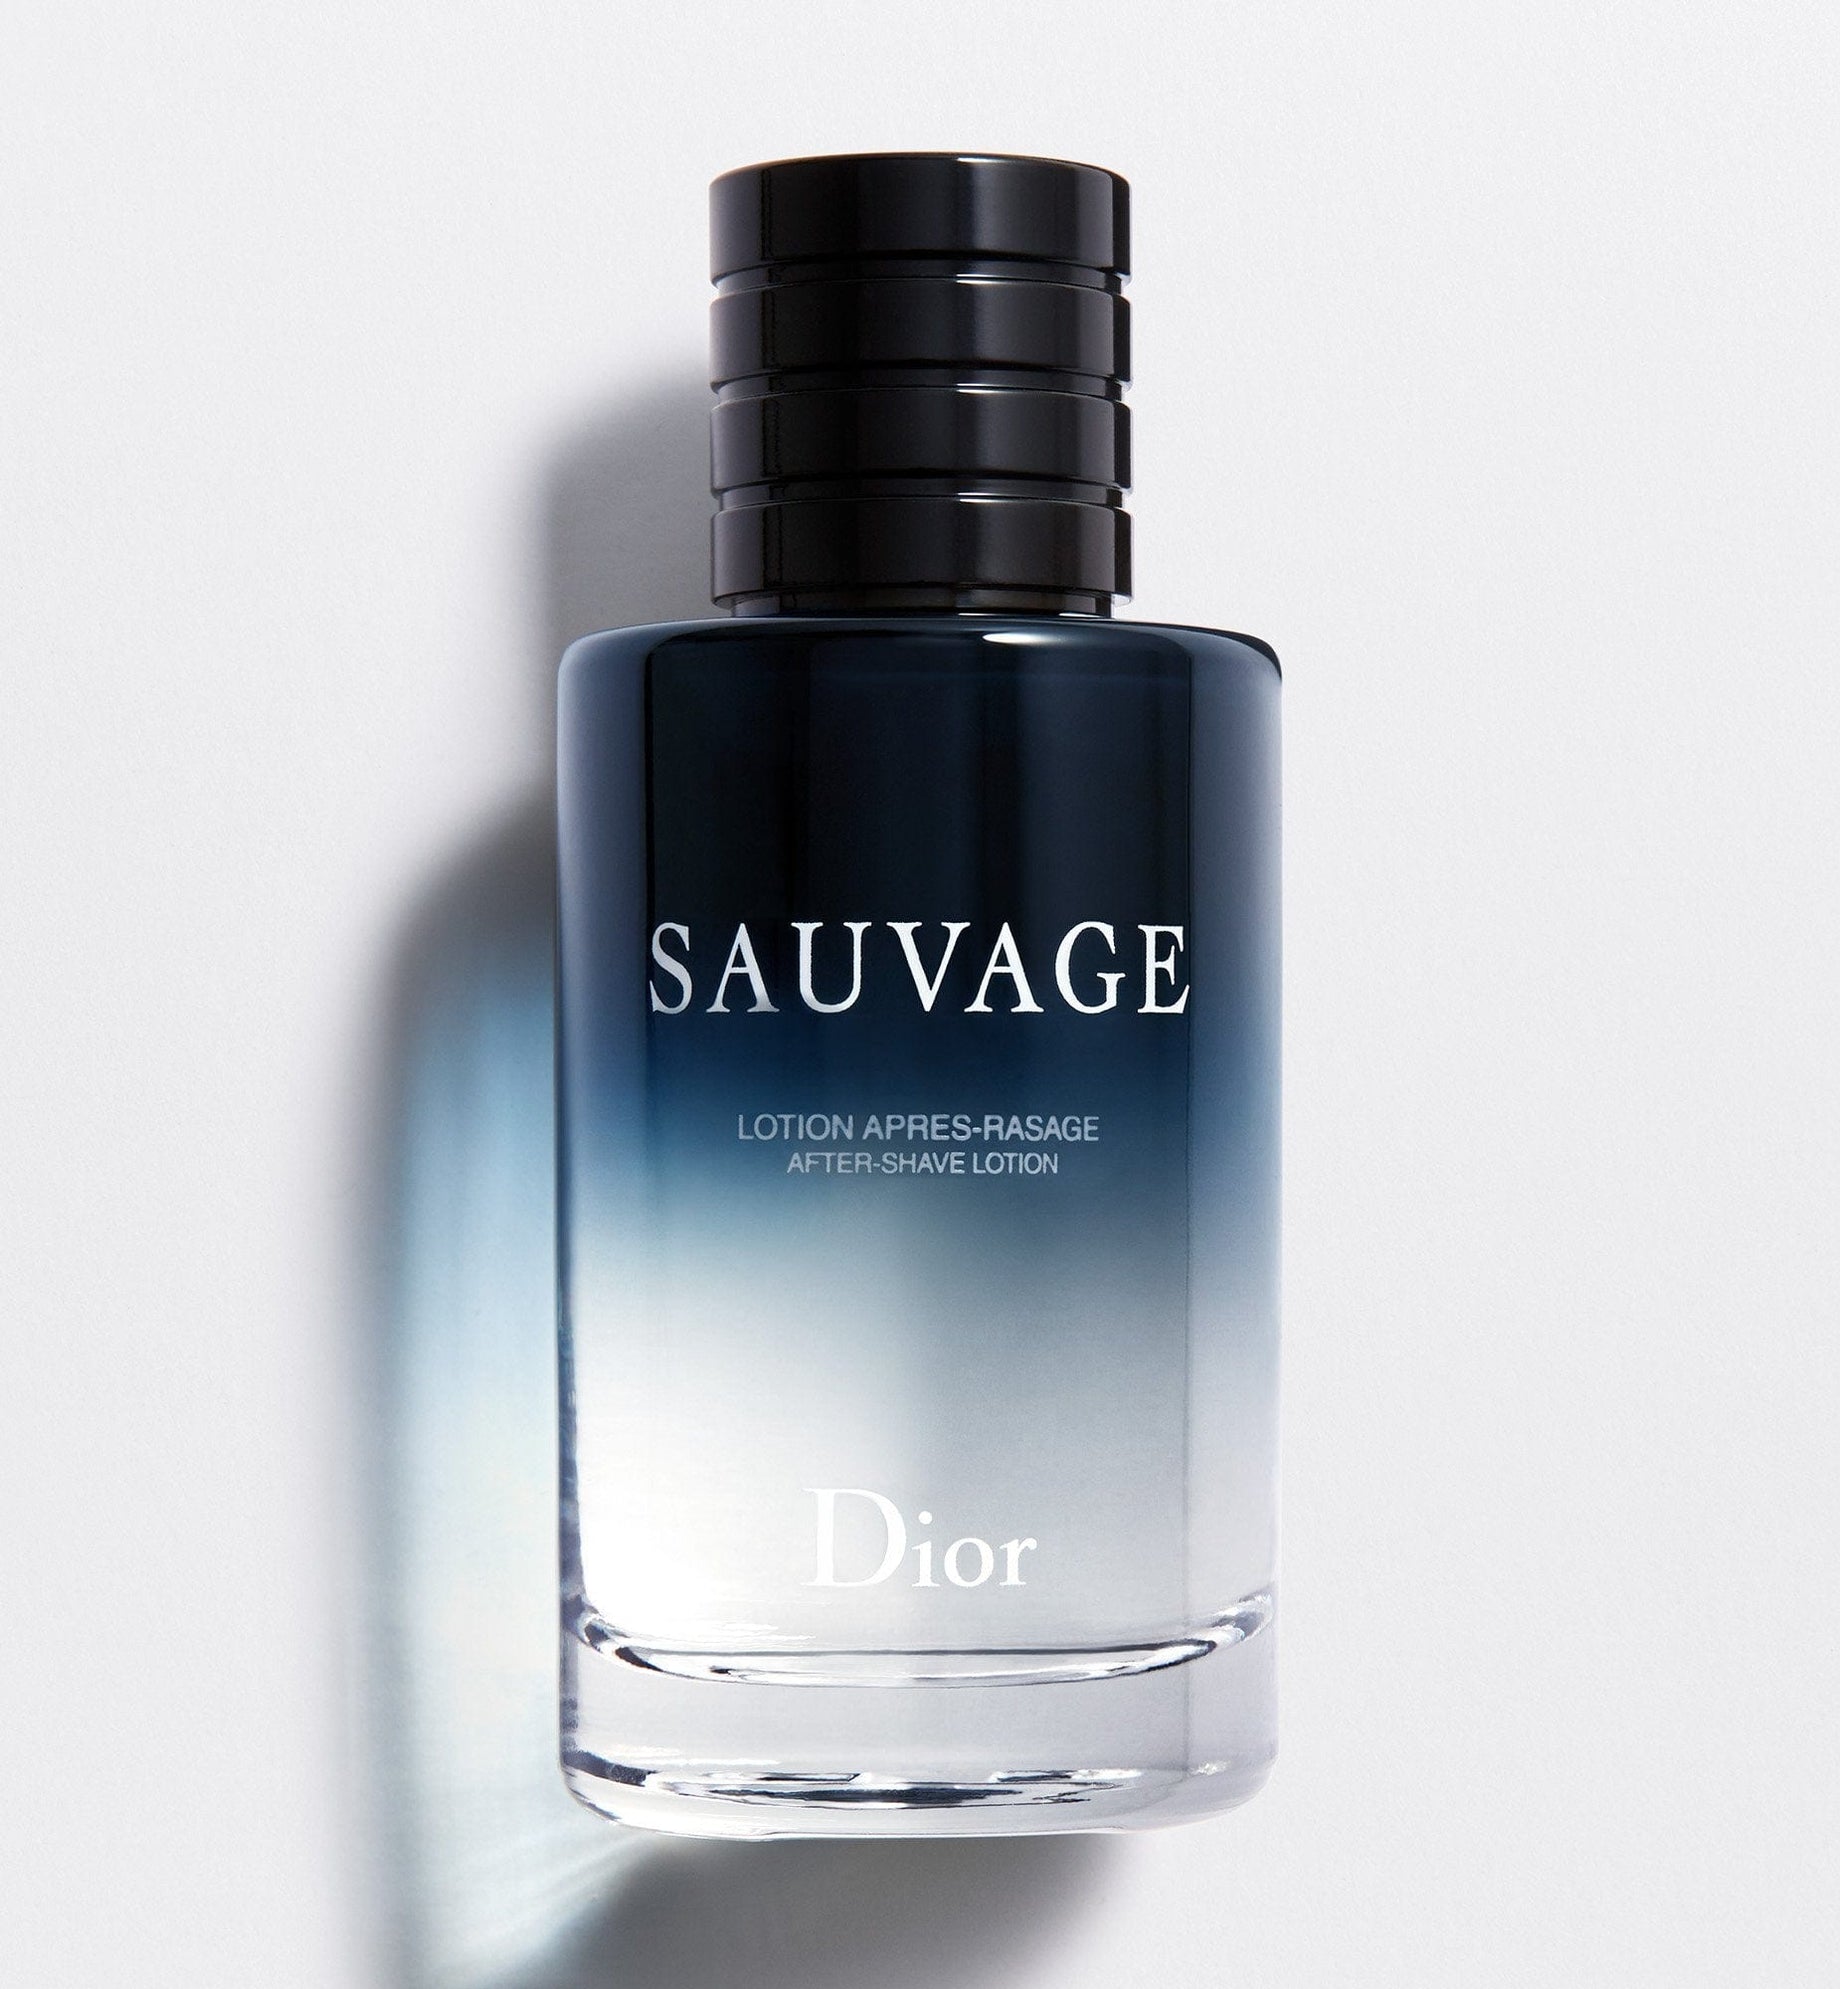 SAUVAGE AFTER-SHAVE LOTION